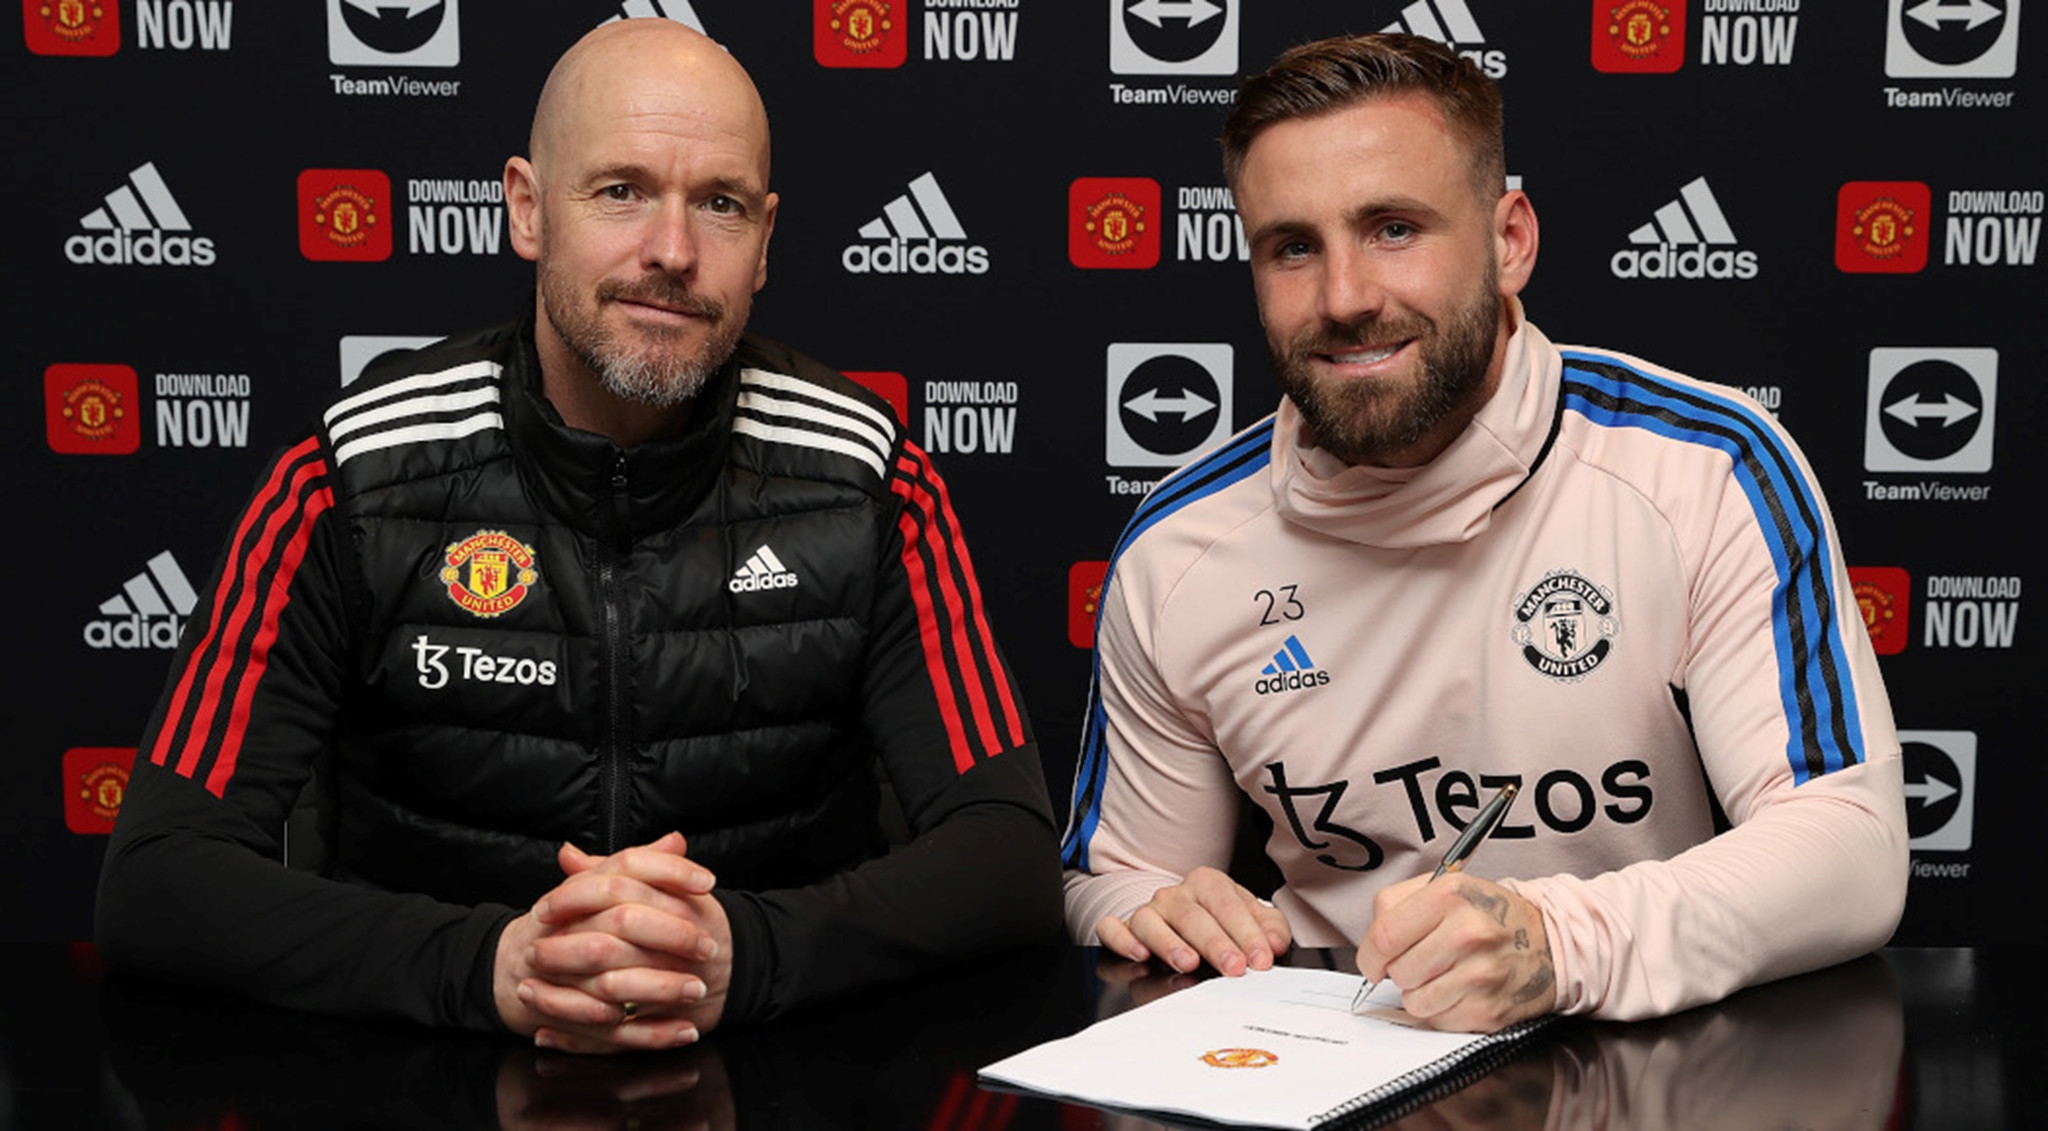 Shaw extends Man Utd contract